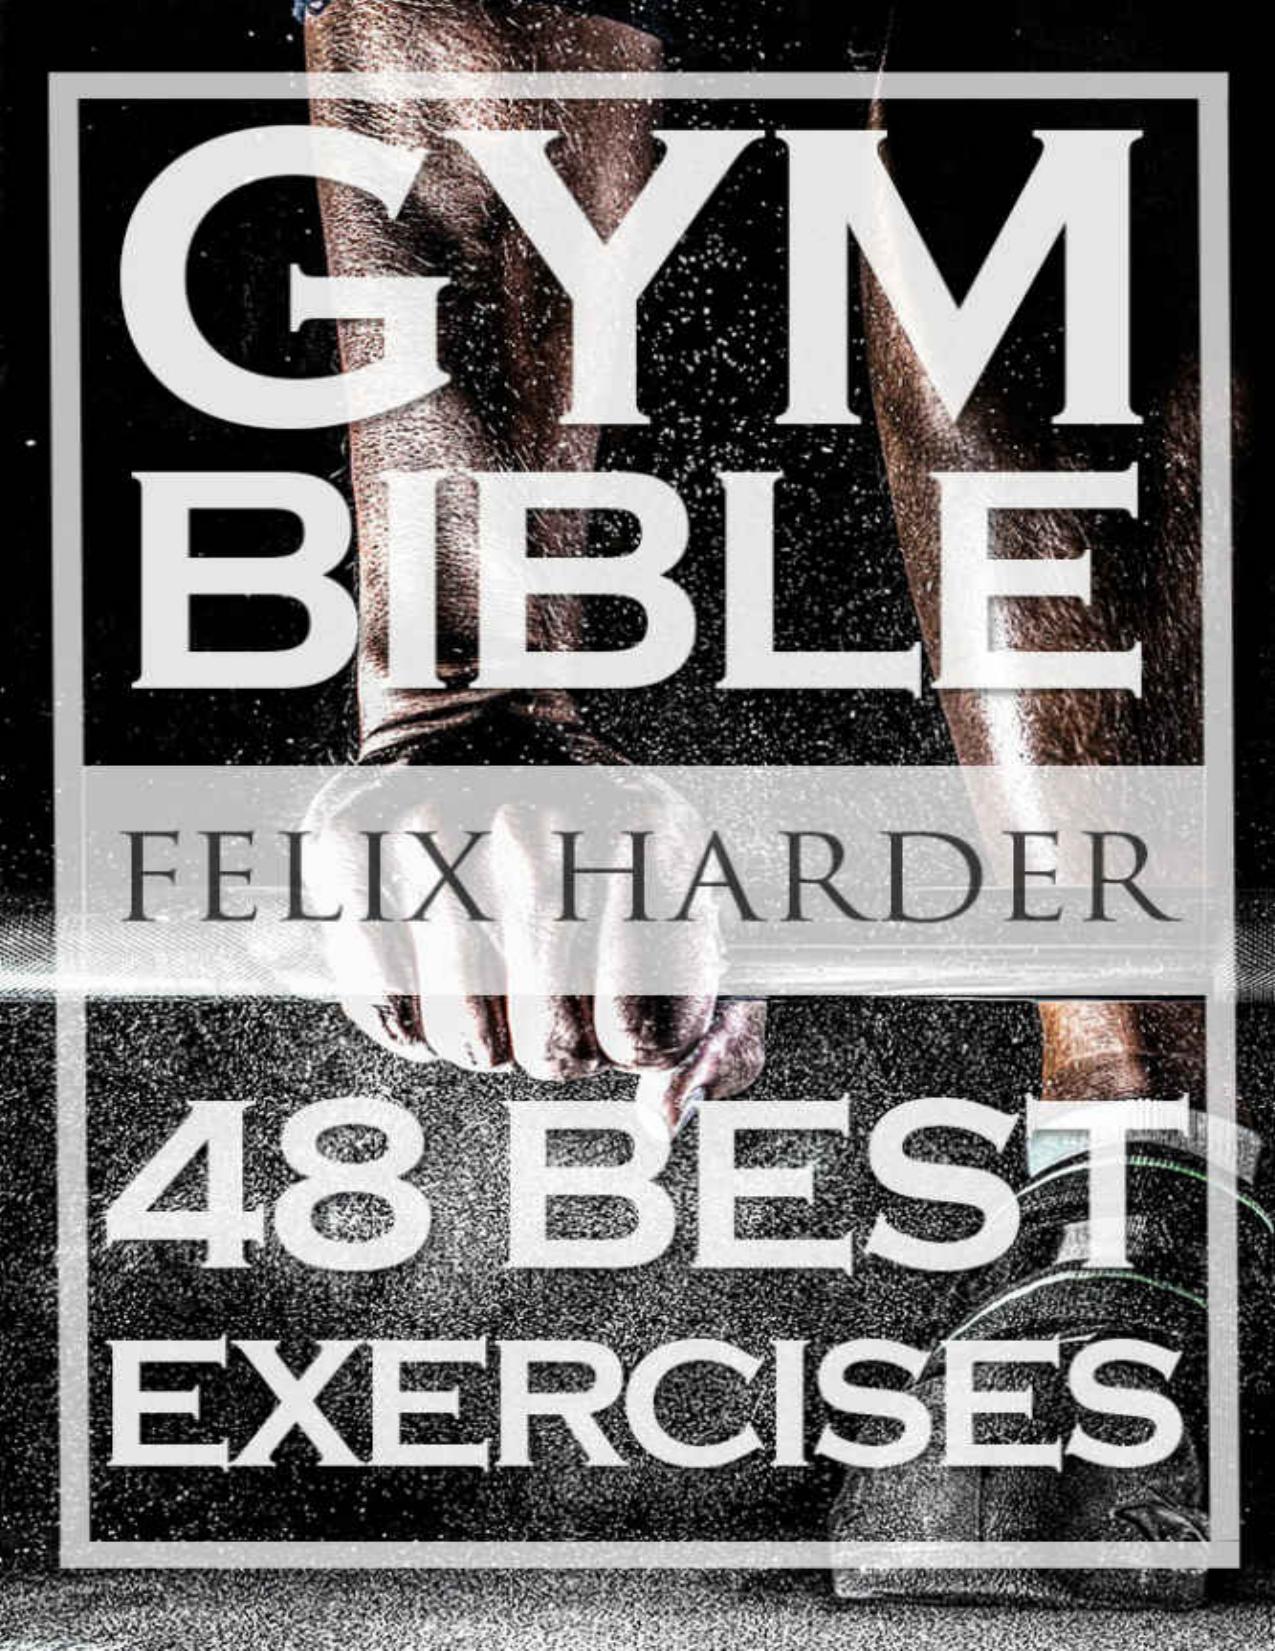 Bodybuilding: Gym Bible: 48 Best Exercises To Add Strength And Muscle (Bodybuilding For Beginners, Weight Training, Bodybuilding Workouts) (Bodybuilding Series) by Felix Harder